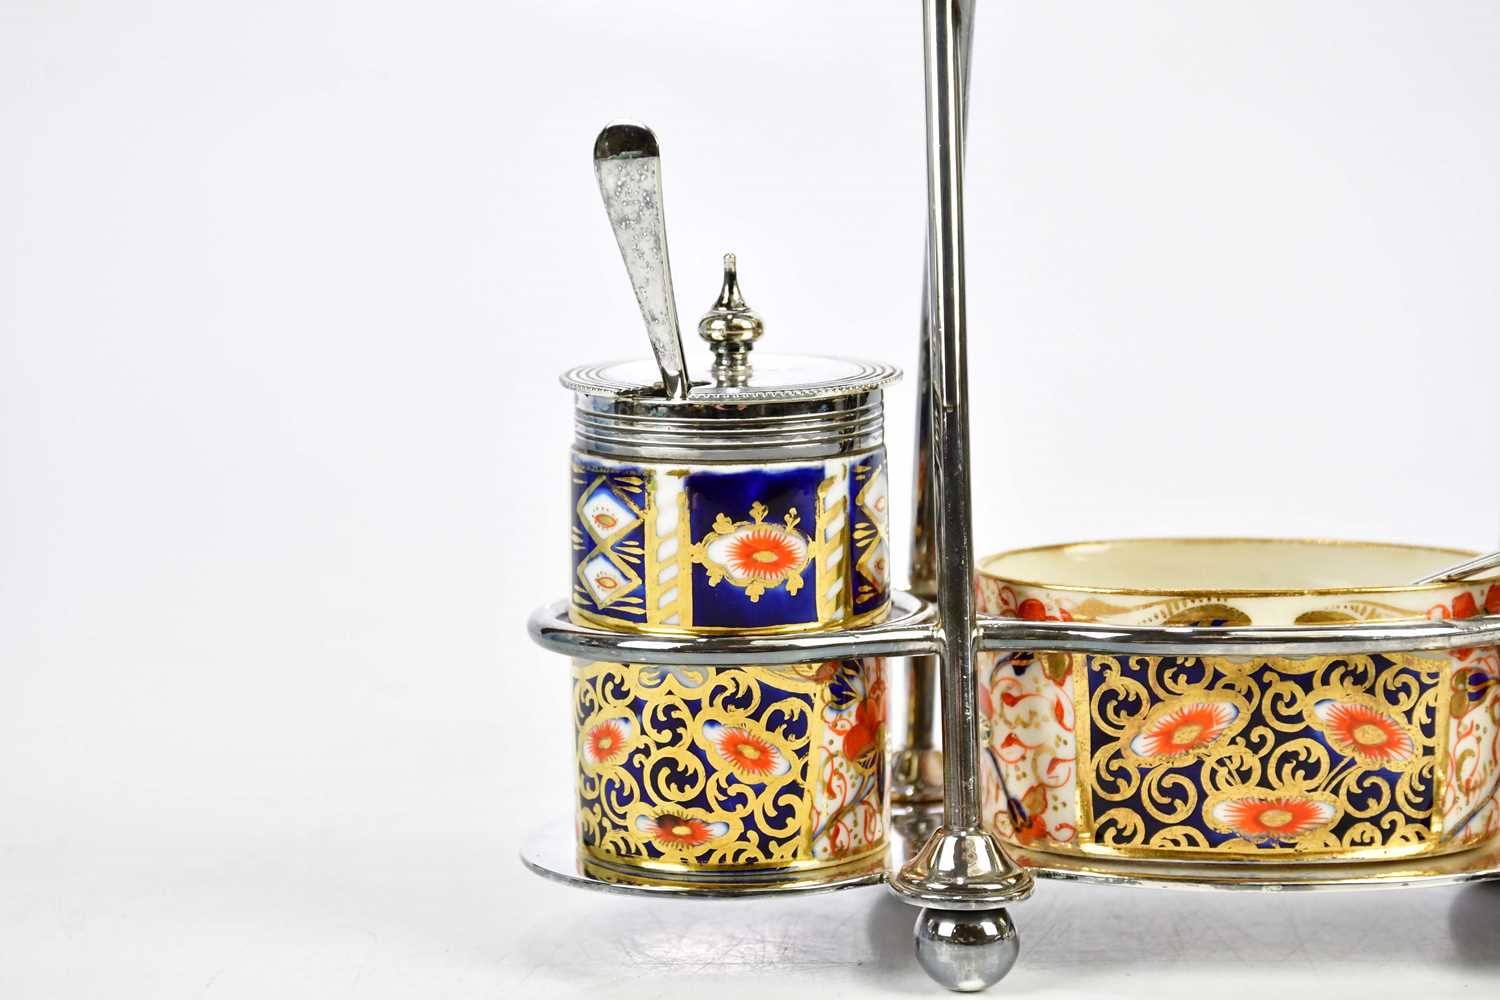 JAMES DEAKIN & SONS; an Arts and Crafts silver plated condiment set with Davenport Imari ceramic - Image 2 of 3